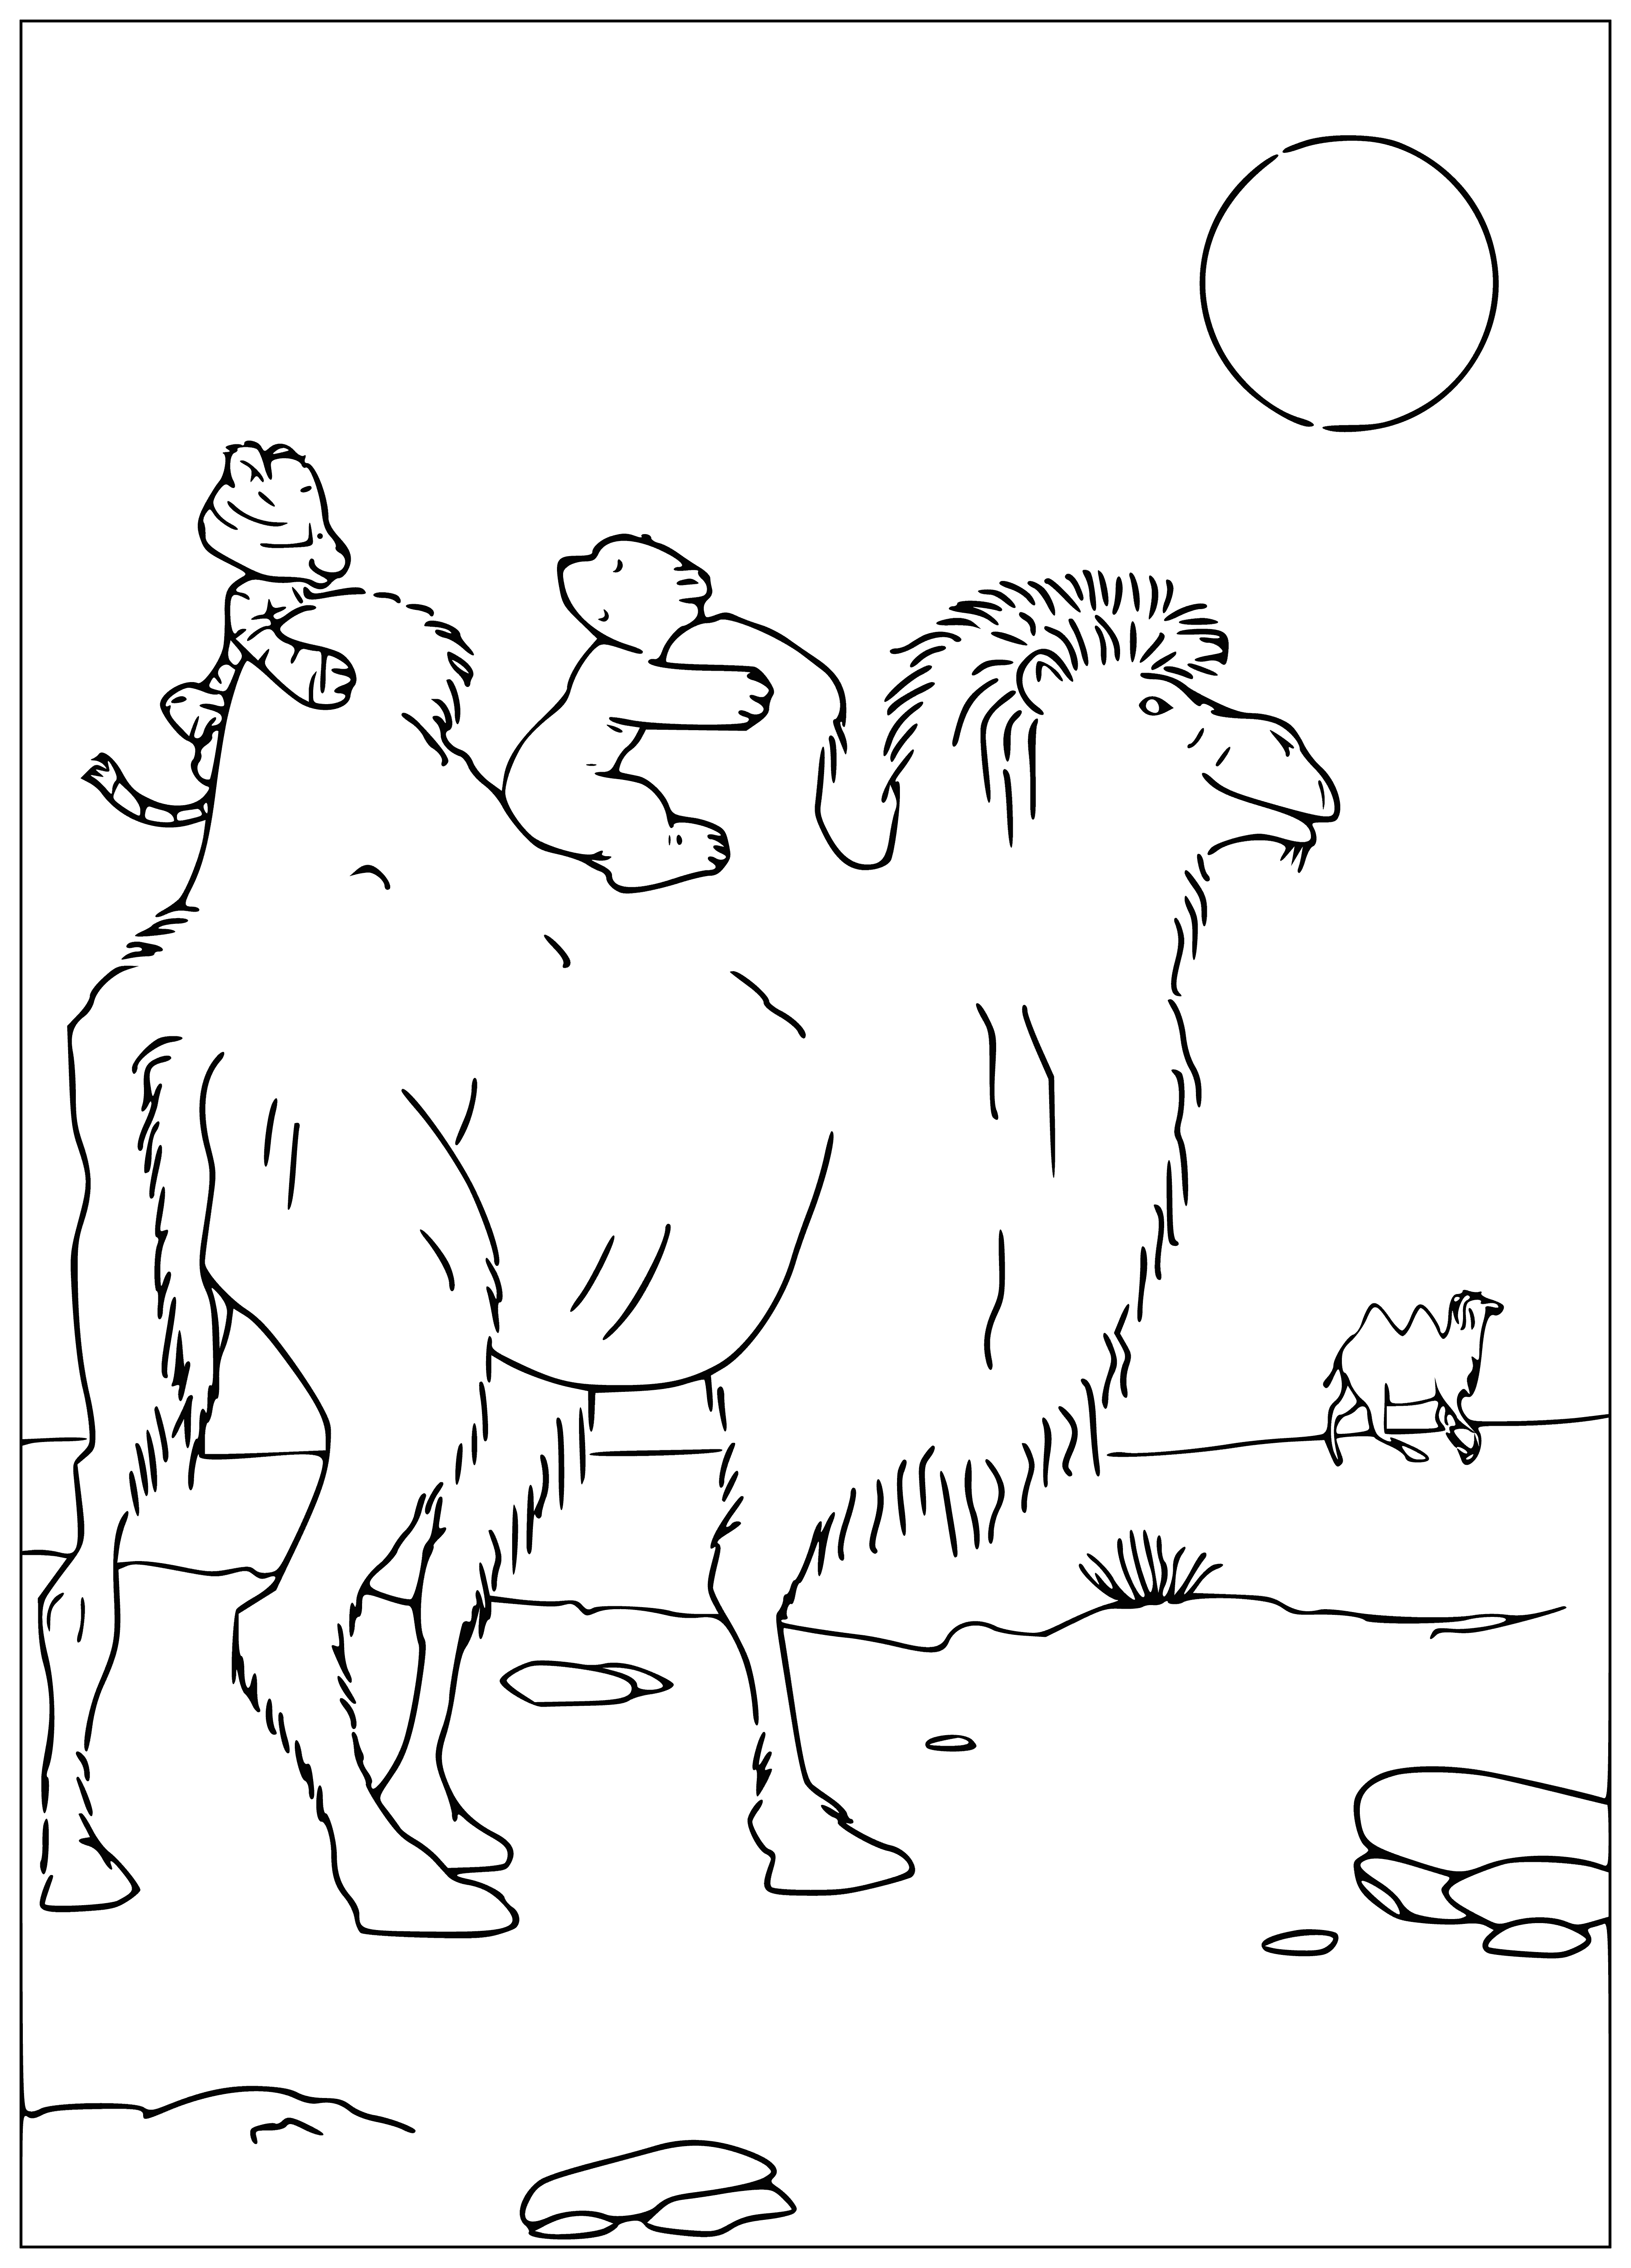 coloring page: Little polar bear and brown-furred camel share dark eyes, illustrating the beauty of nature and friendship.